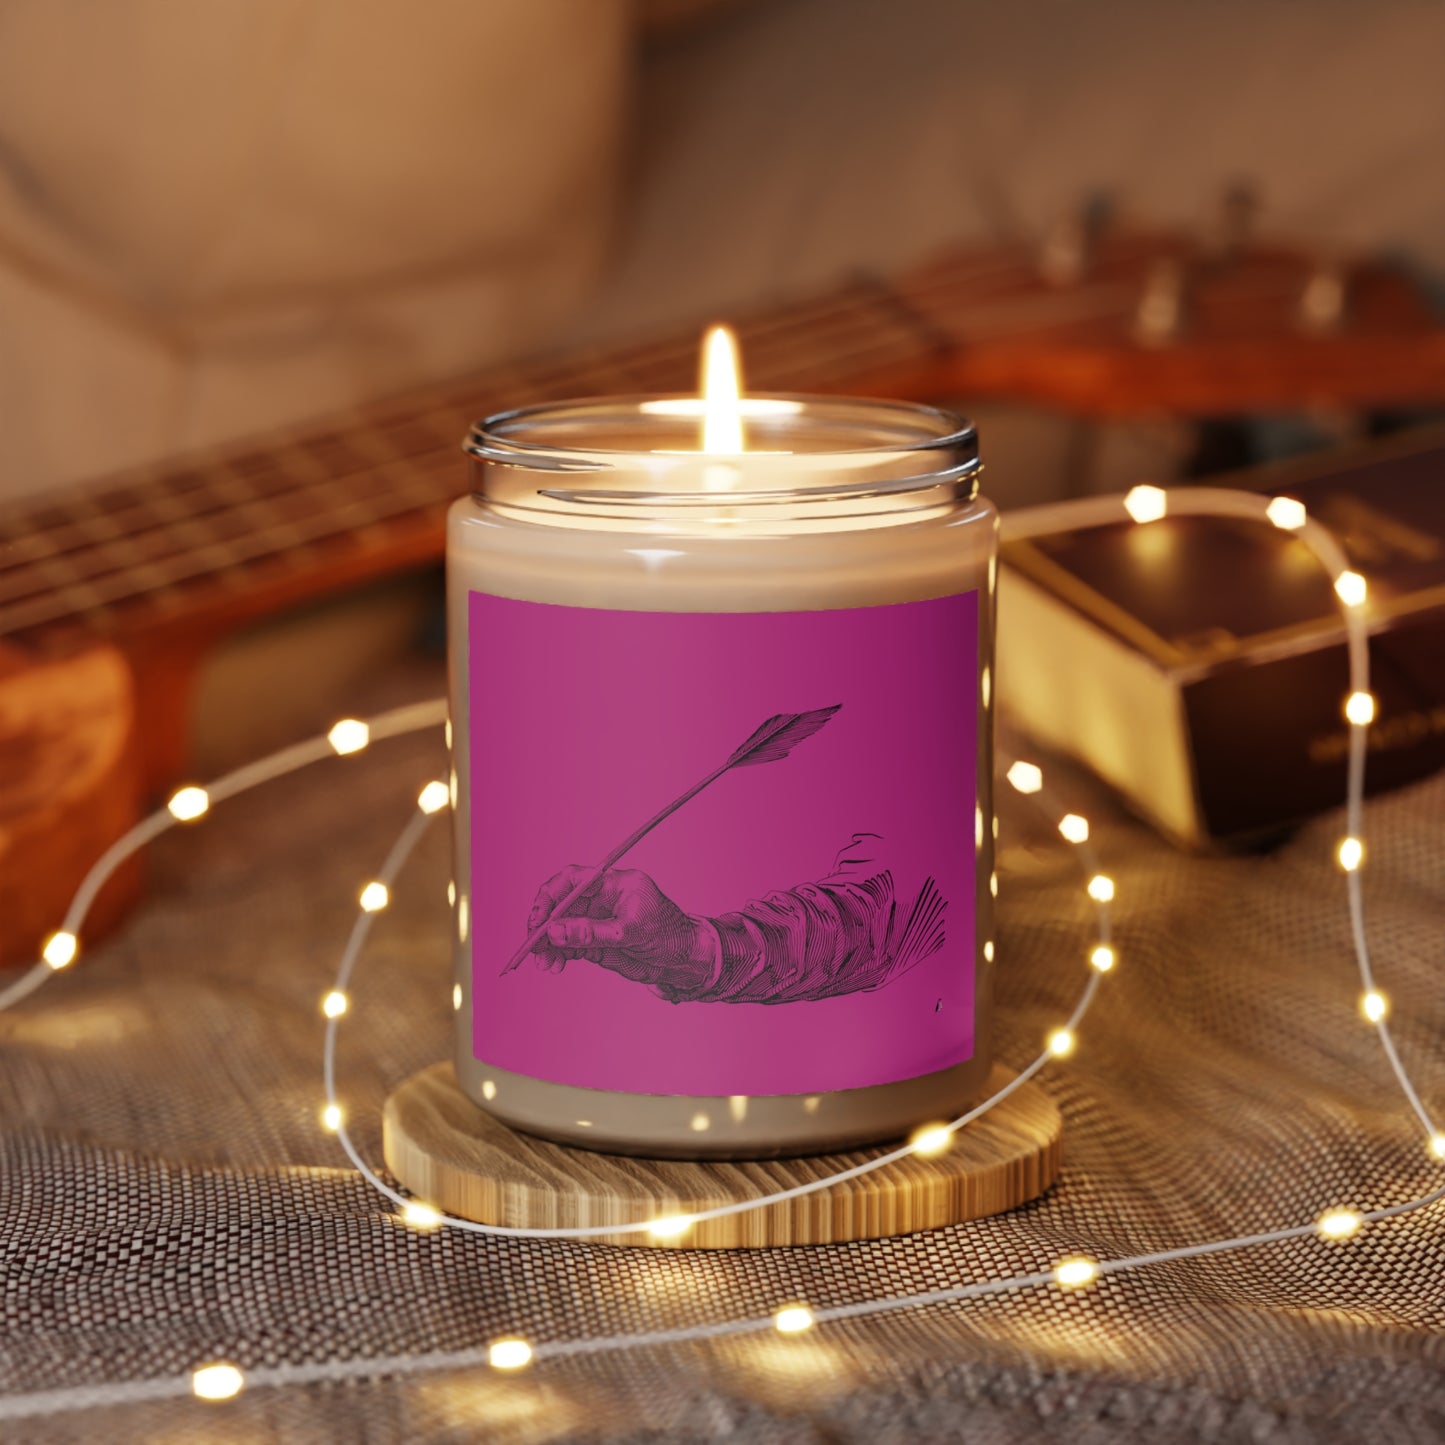 Scented Candle, 9oz: Writing Pink